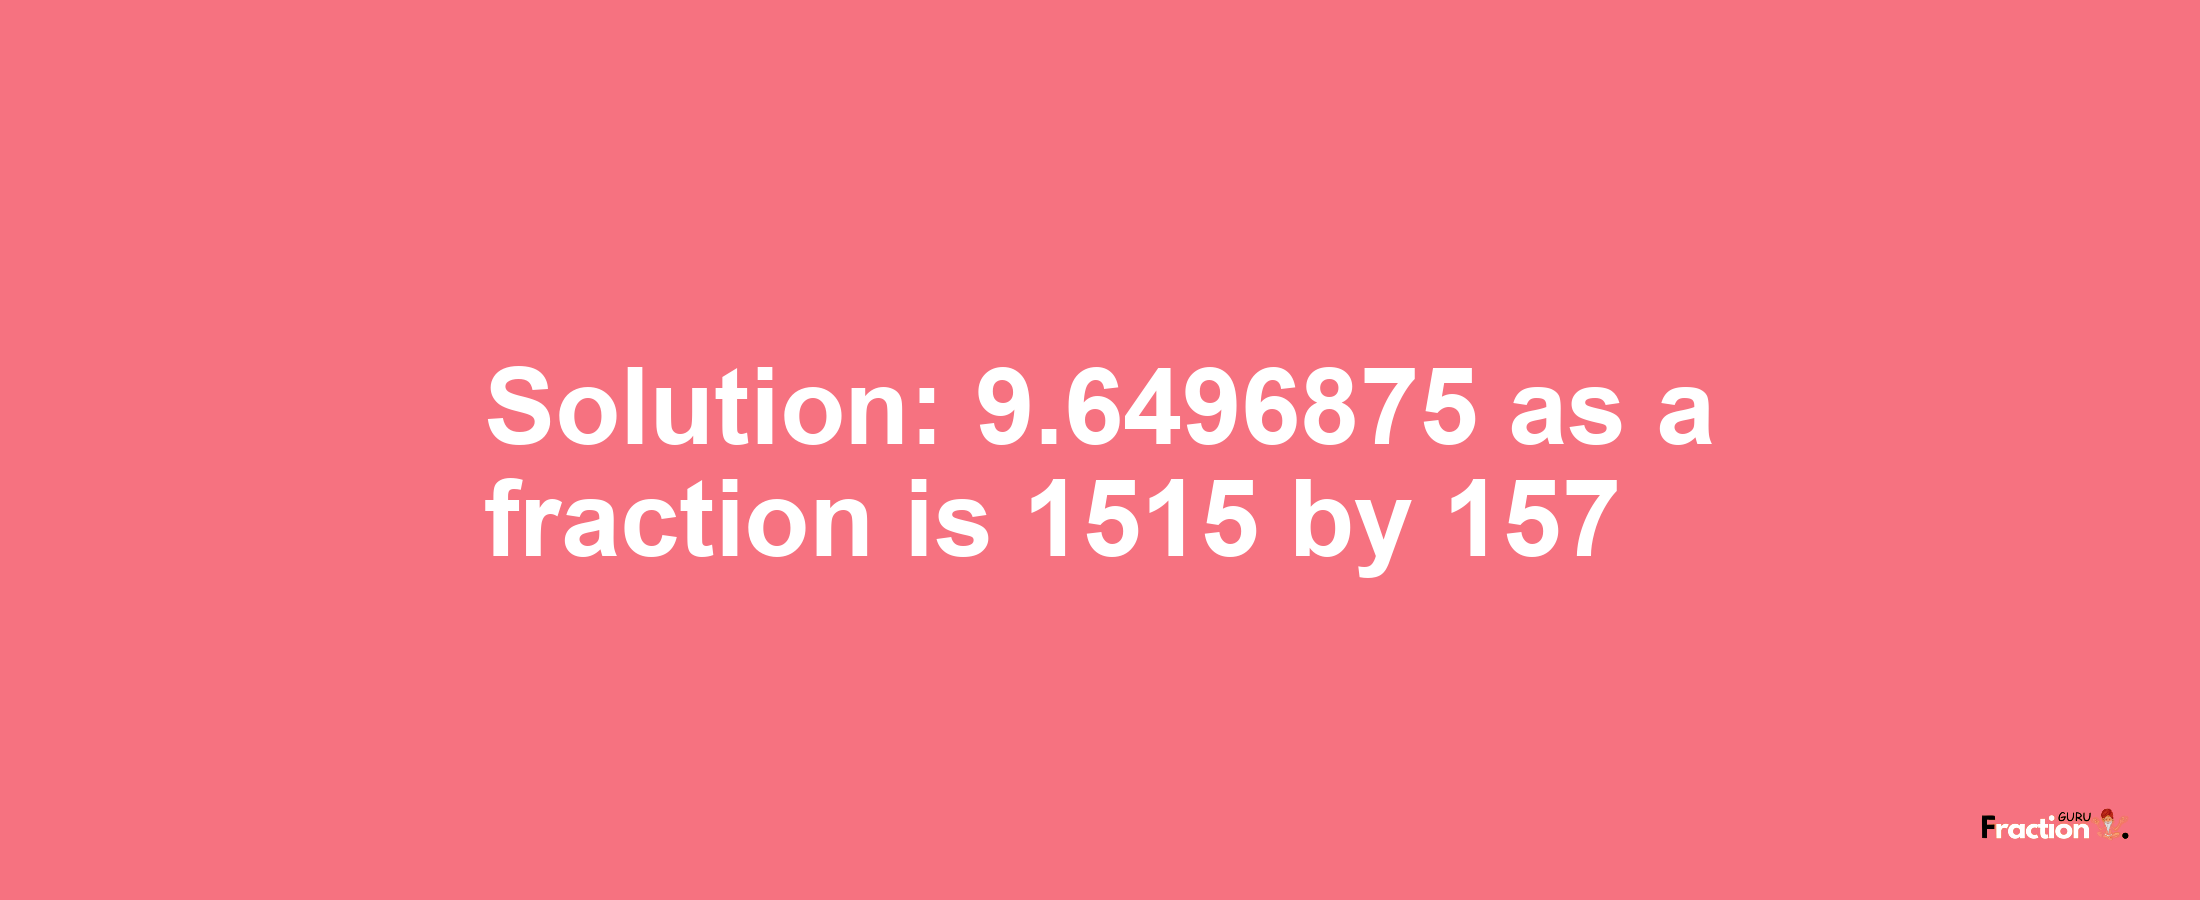 Solution:9.6496875 as a fraction is 1515/157